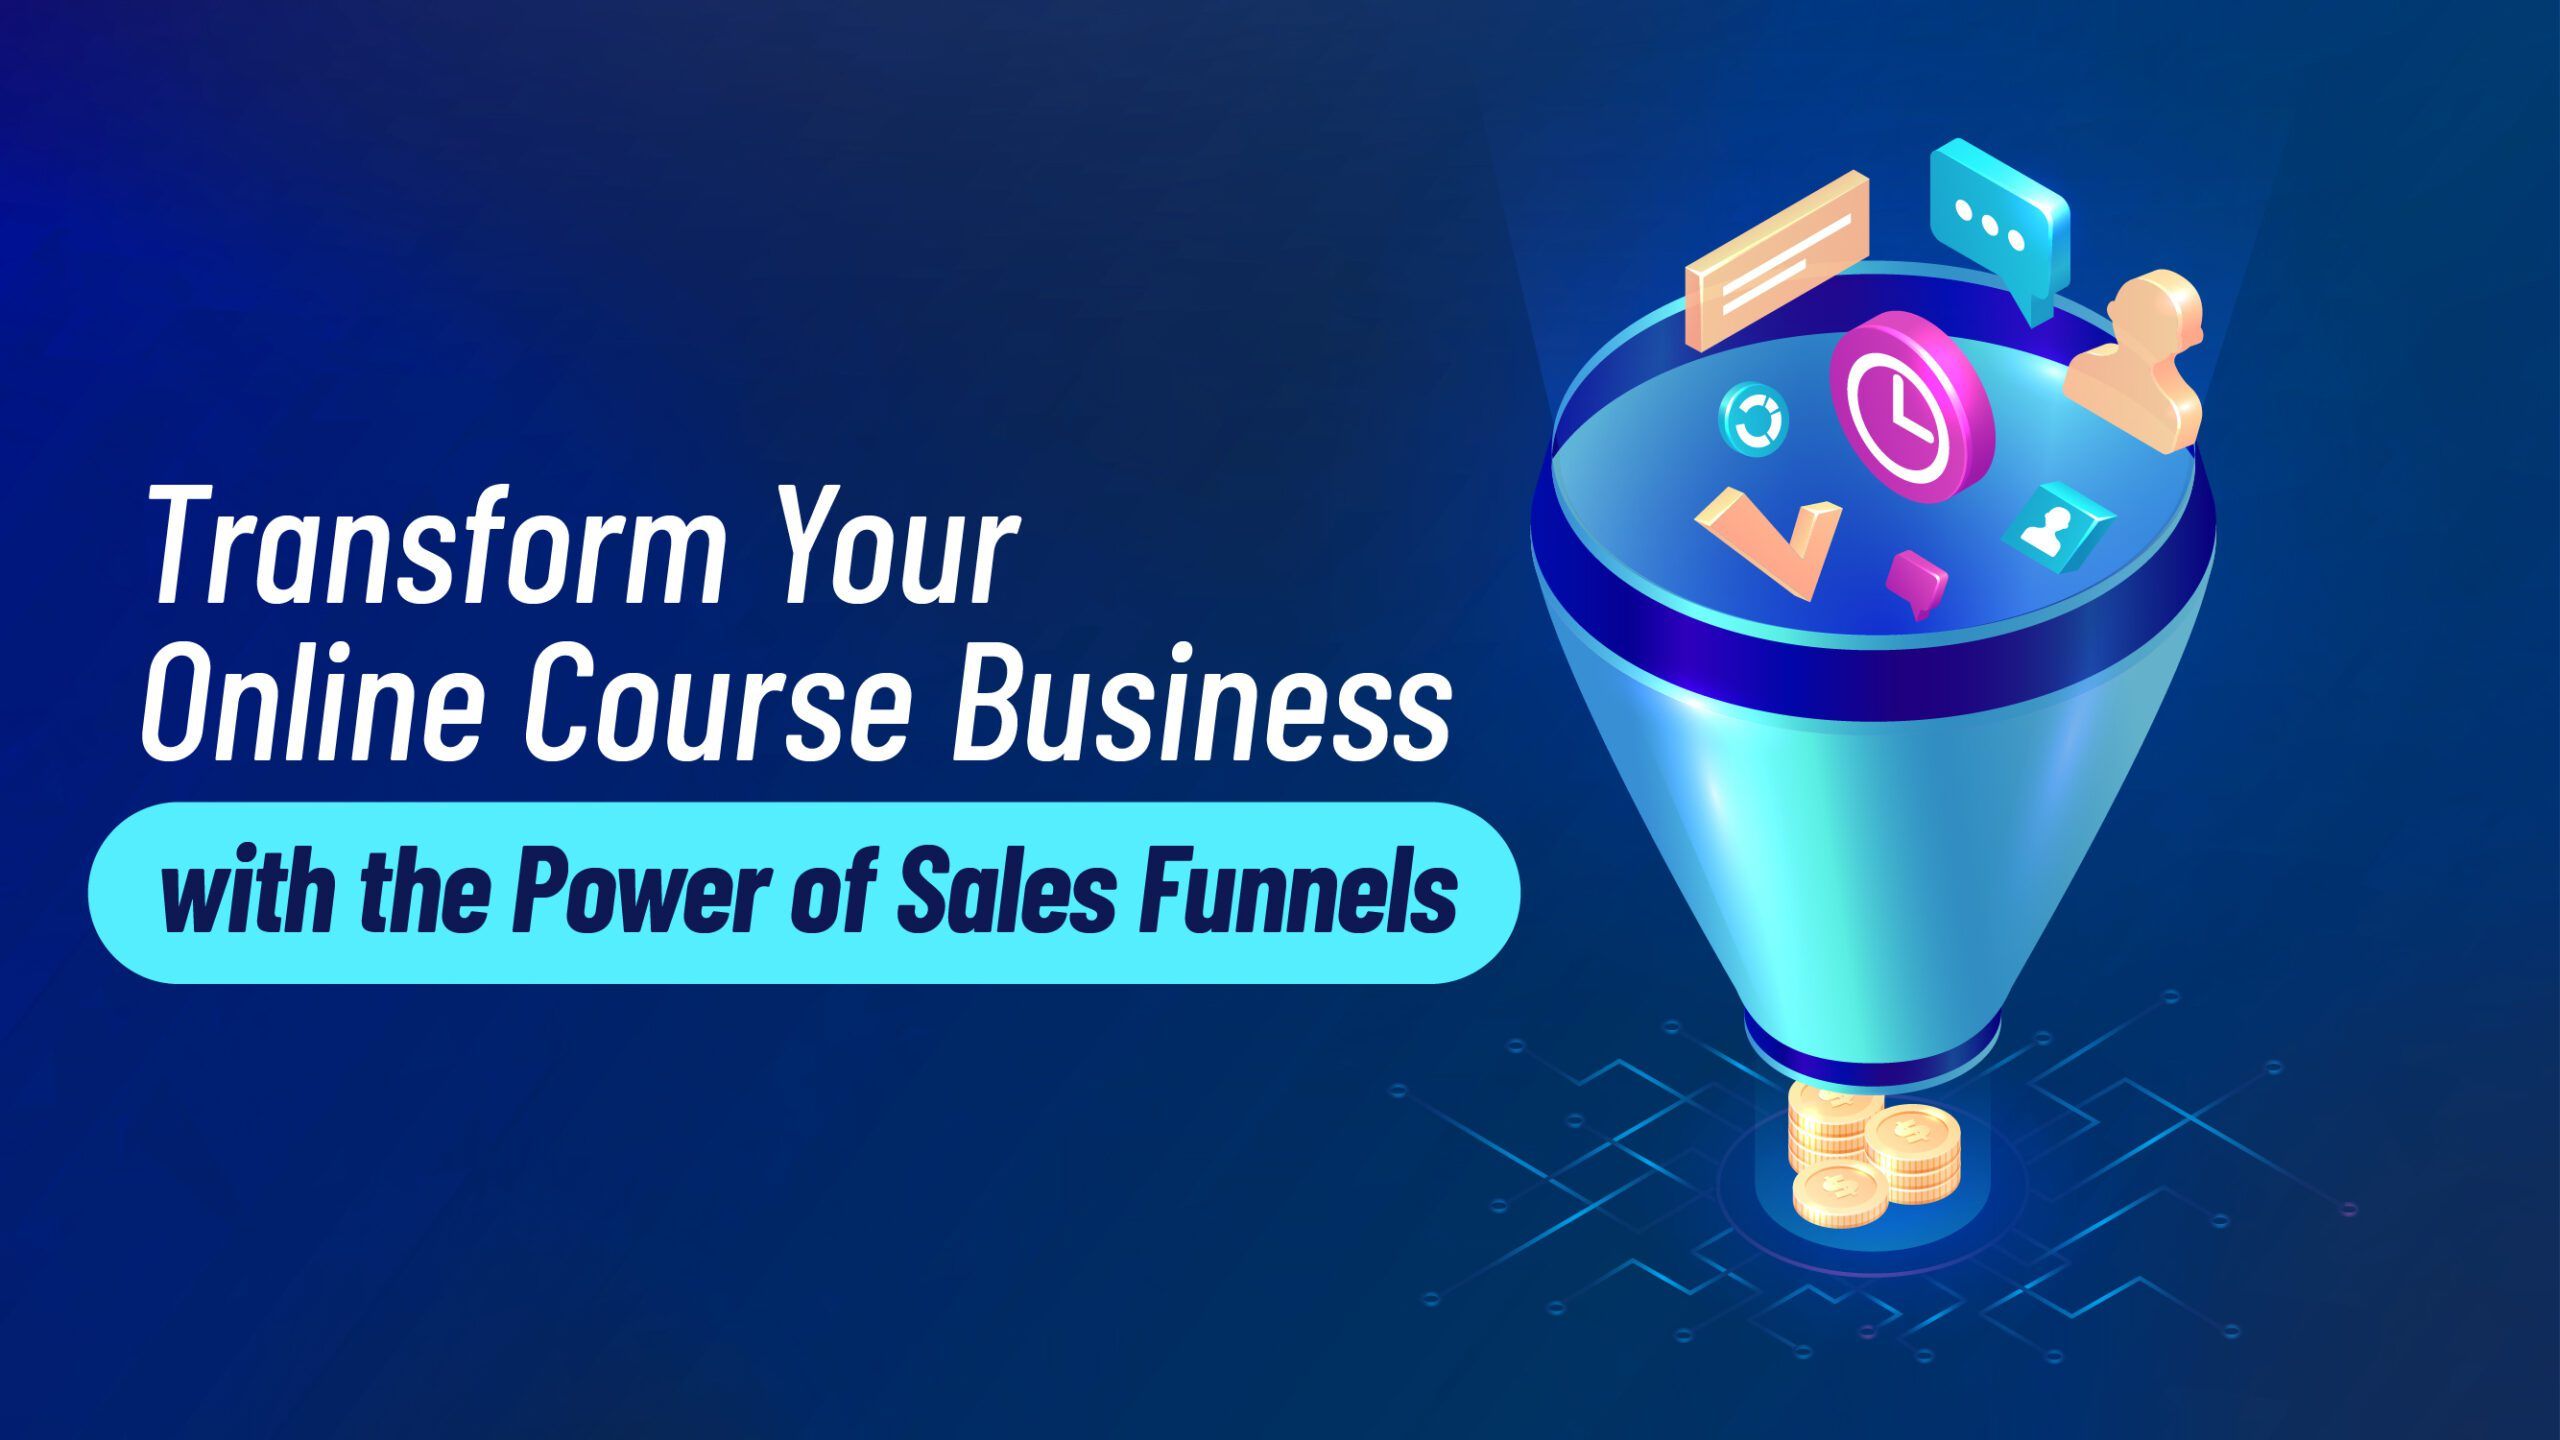 Transform Your Online Course Business with the Power of Sales Funnels